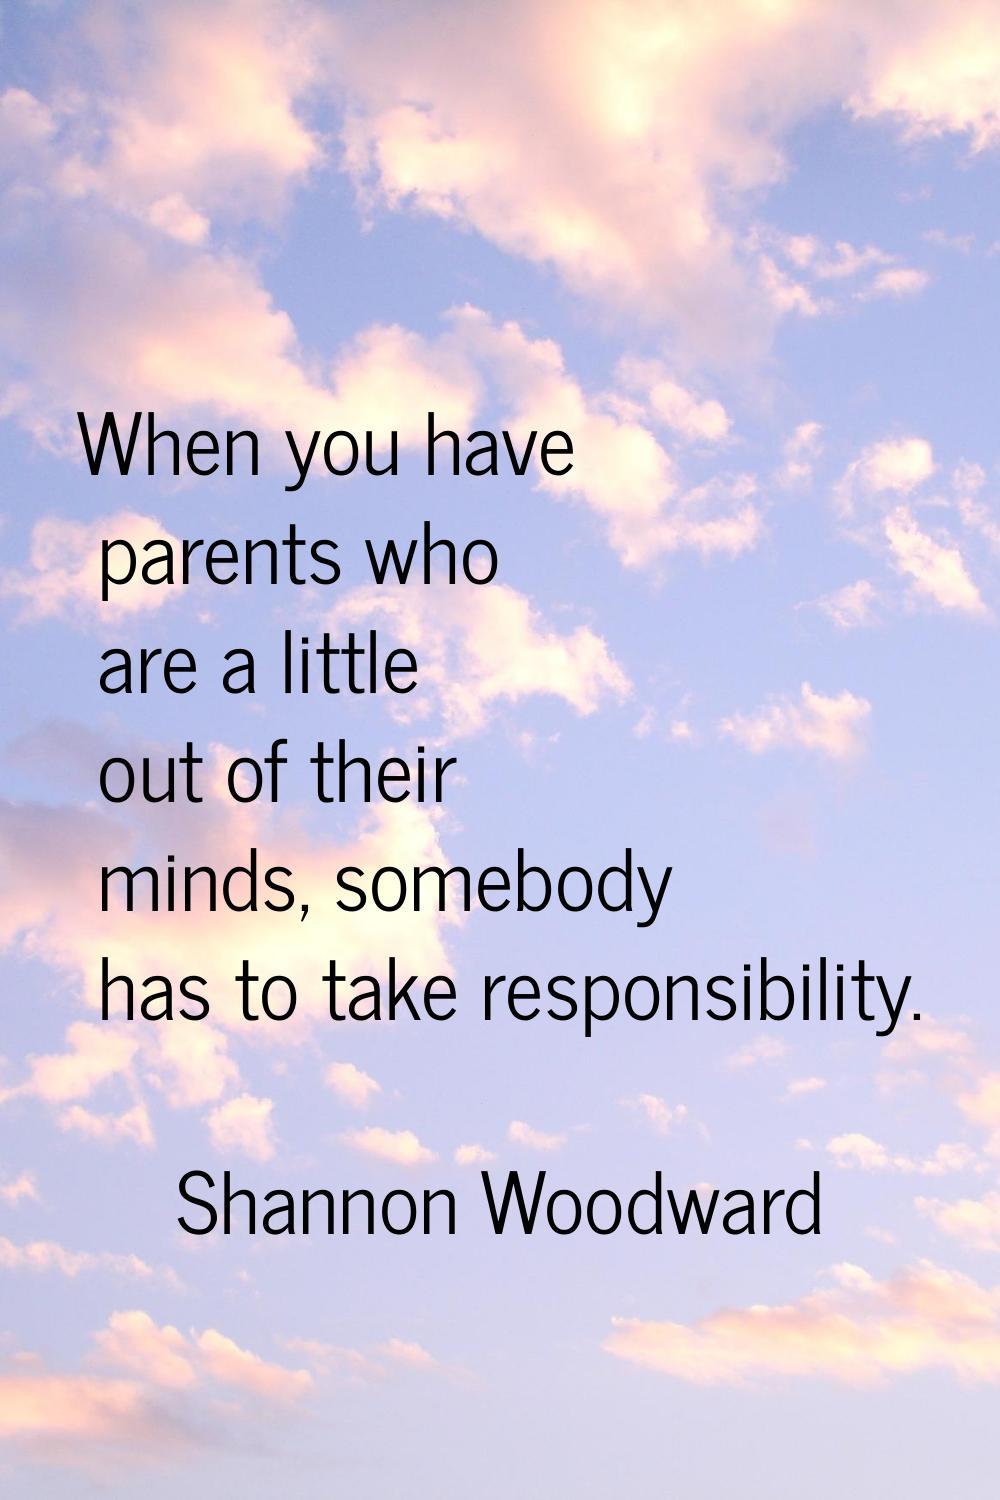 When you have parents who are a little out of their minds, somebody has to take responsibility.